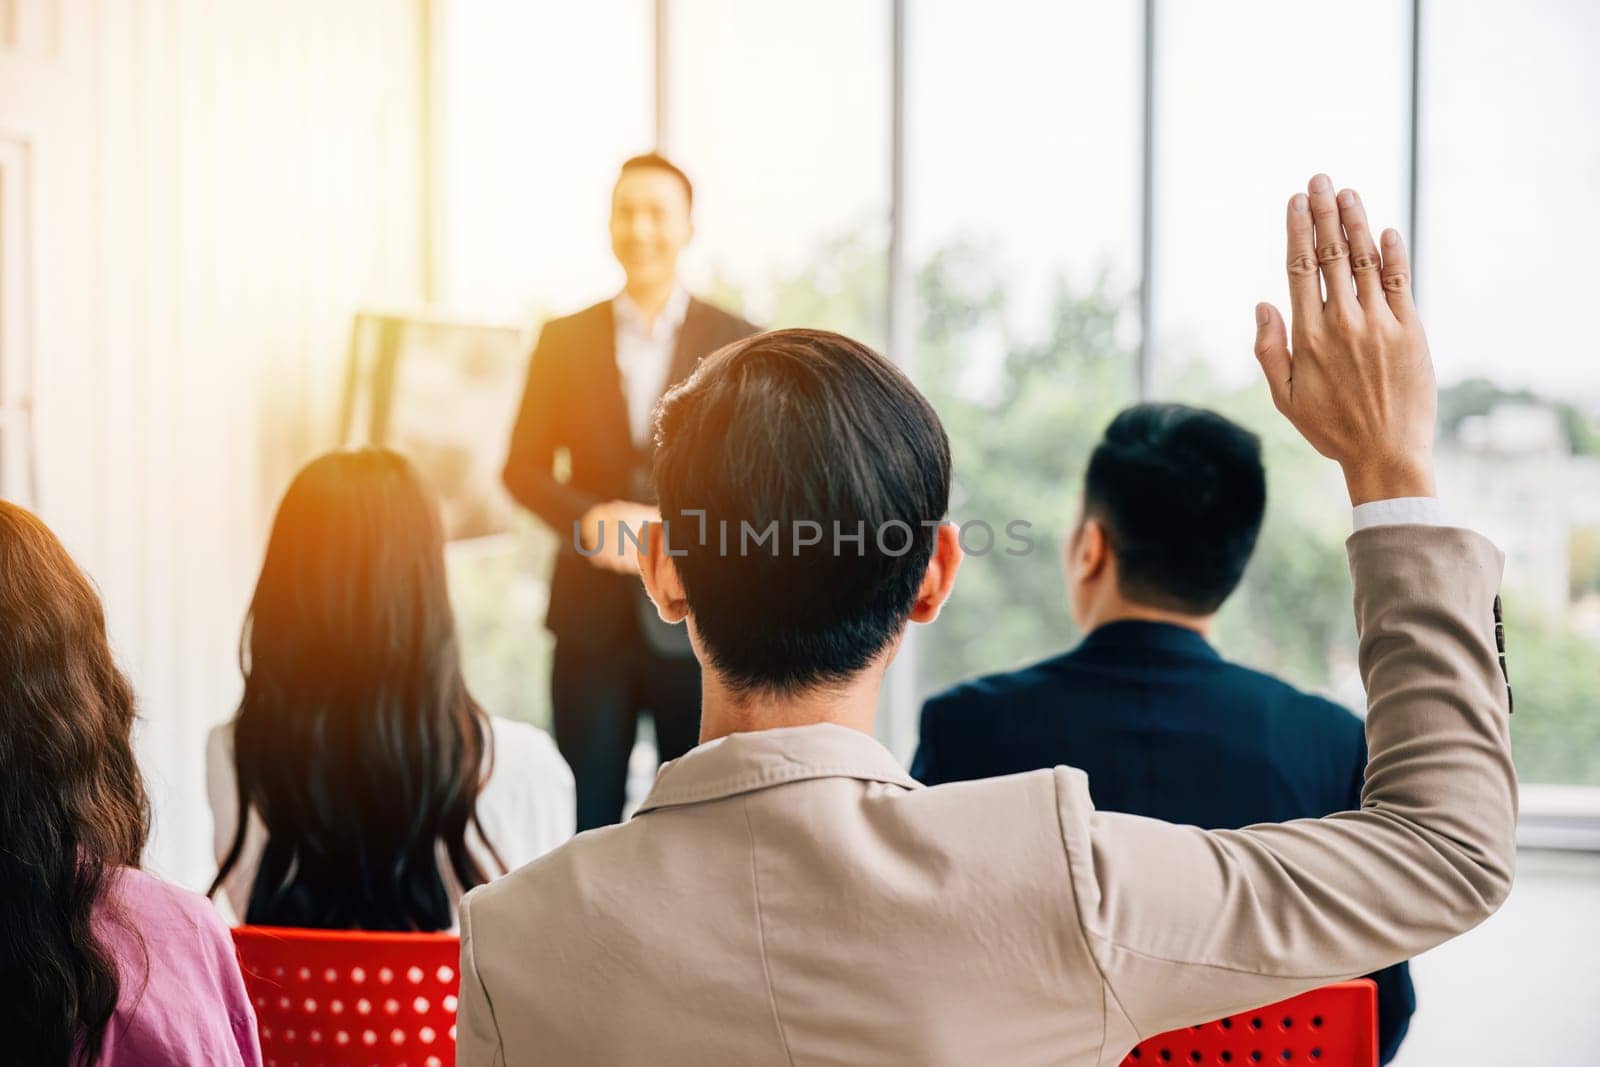 Audience engagement at a conference as hands are raised for questions, emphasizing the interactive nature of the meeting. A diverse group collaborates at a workshop or seminar presentation. by Sorapop